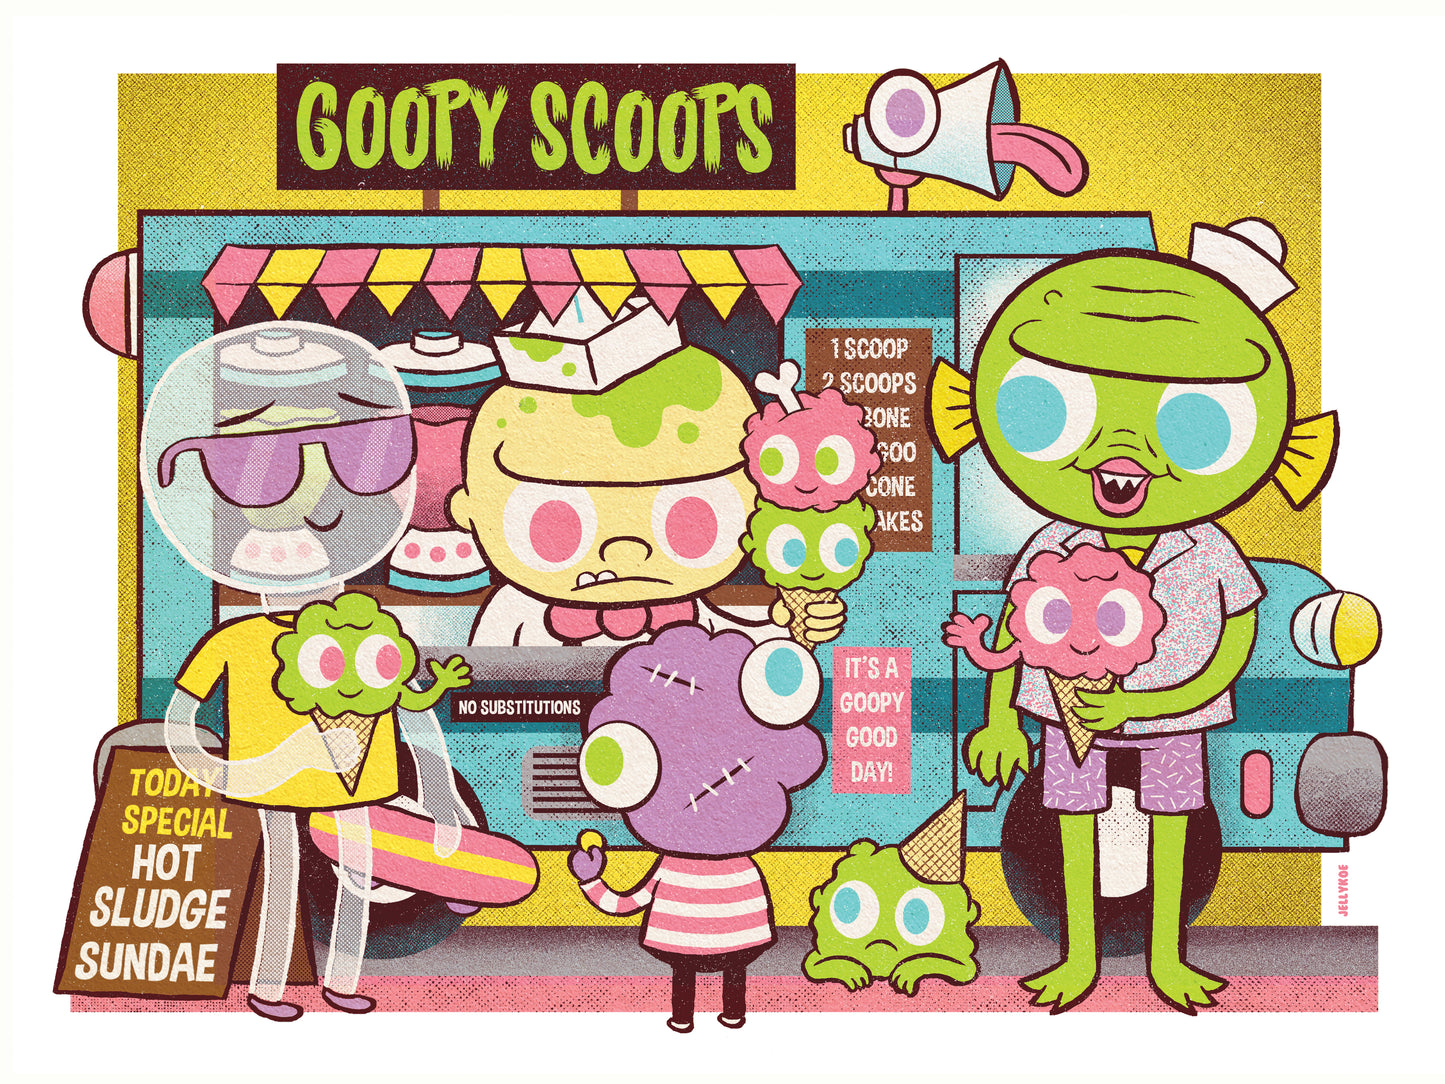 "Goopy Scoops" 12 x 16 limited edition poster print